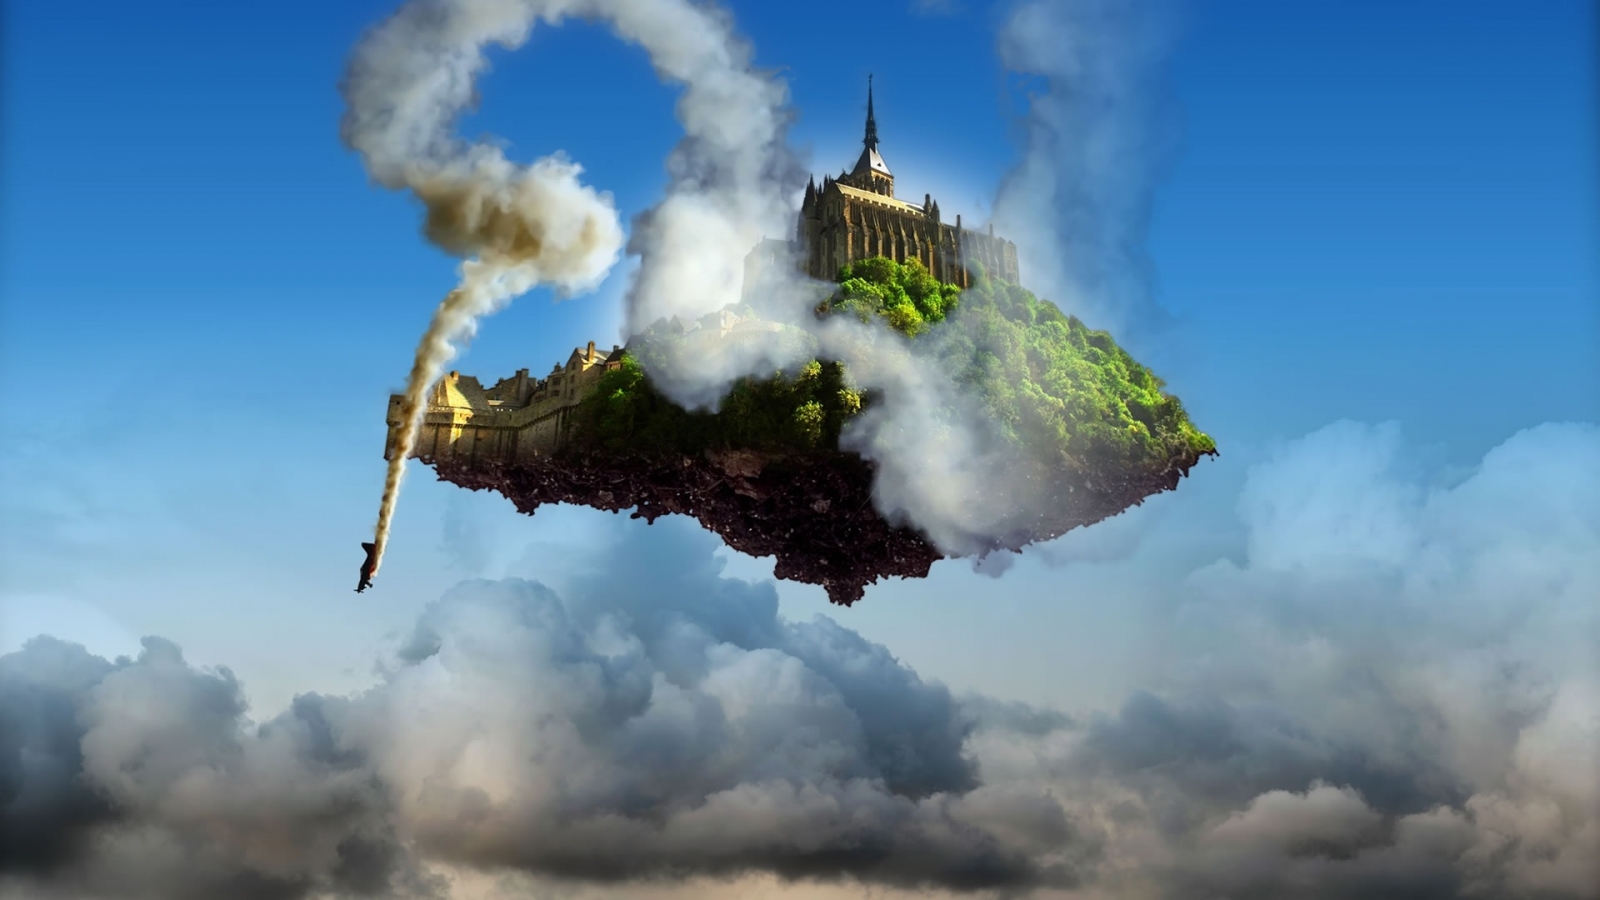 General 1600x900 architecture ancient tower clouds floating island smoke plants digital art building cathedral